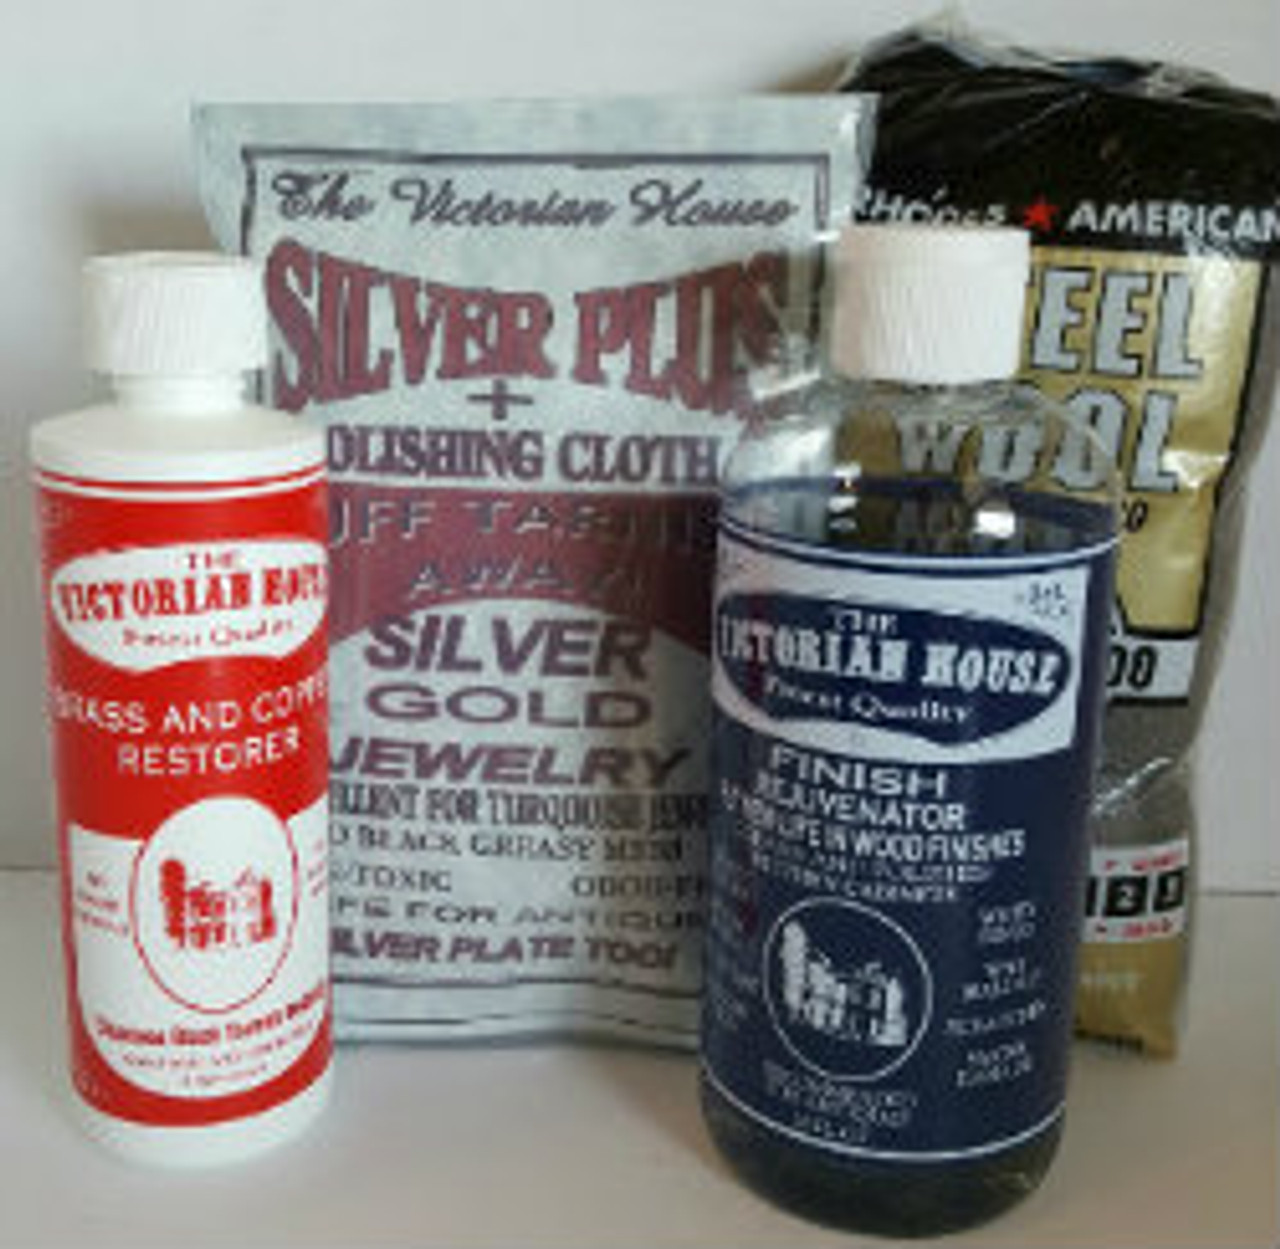 4 Pack--1 VH Rejuvenator, Kitchen Cabinet cleaner, 1 Brass Cleaner, Silver  Plus and Steel Wool